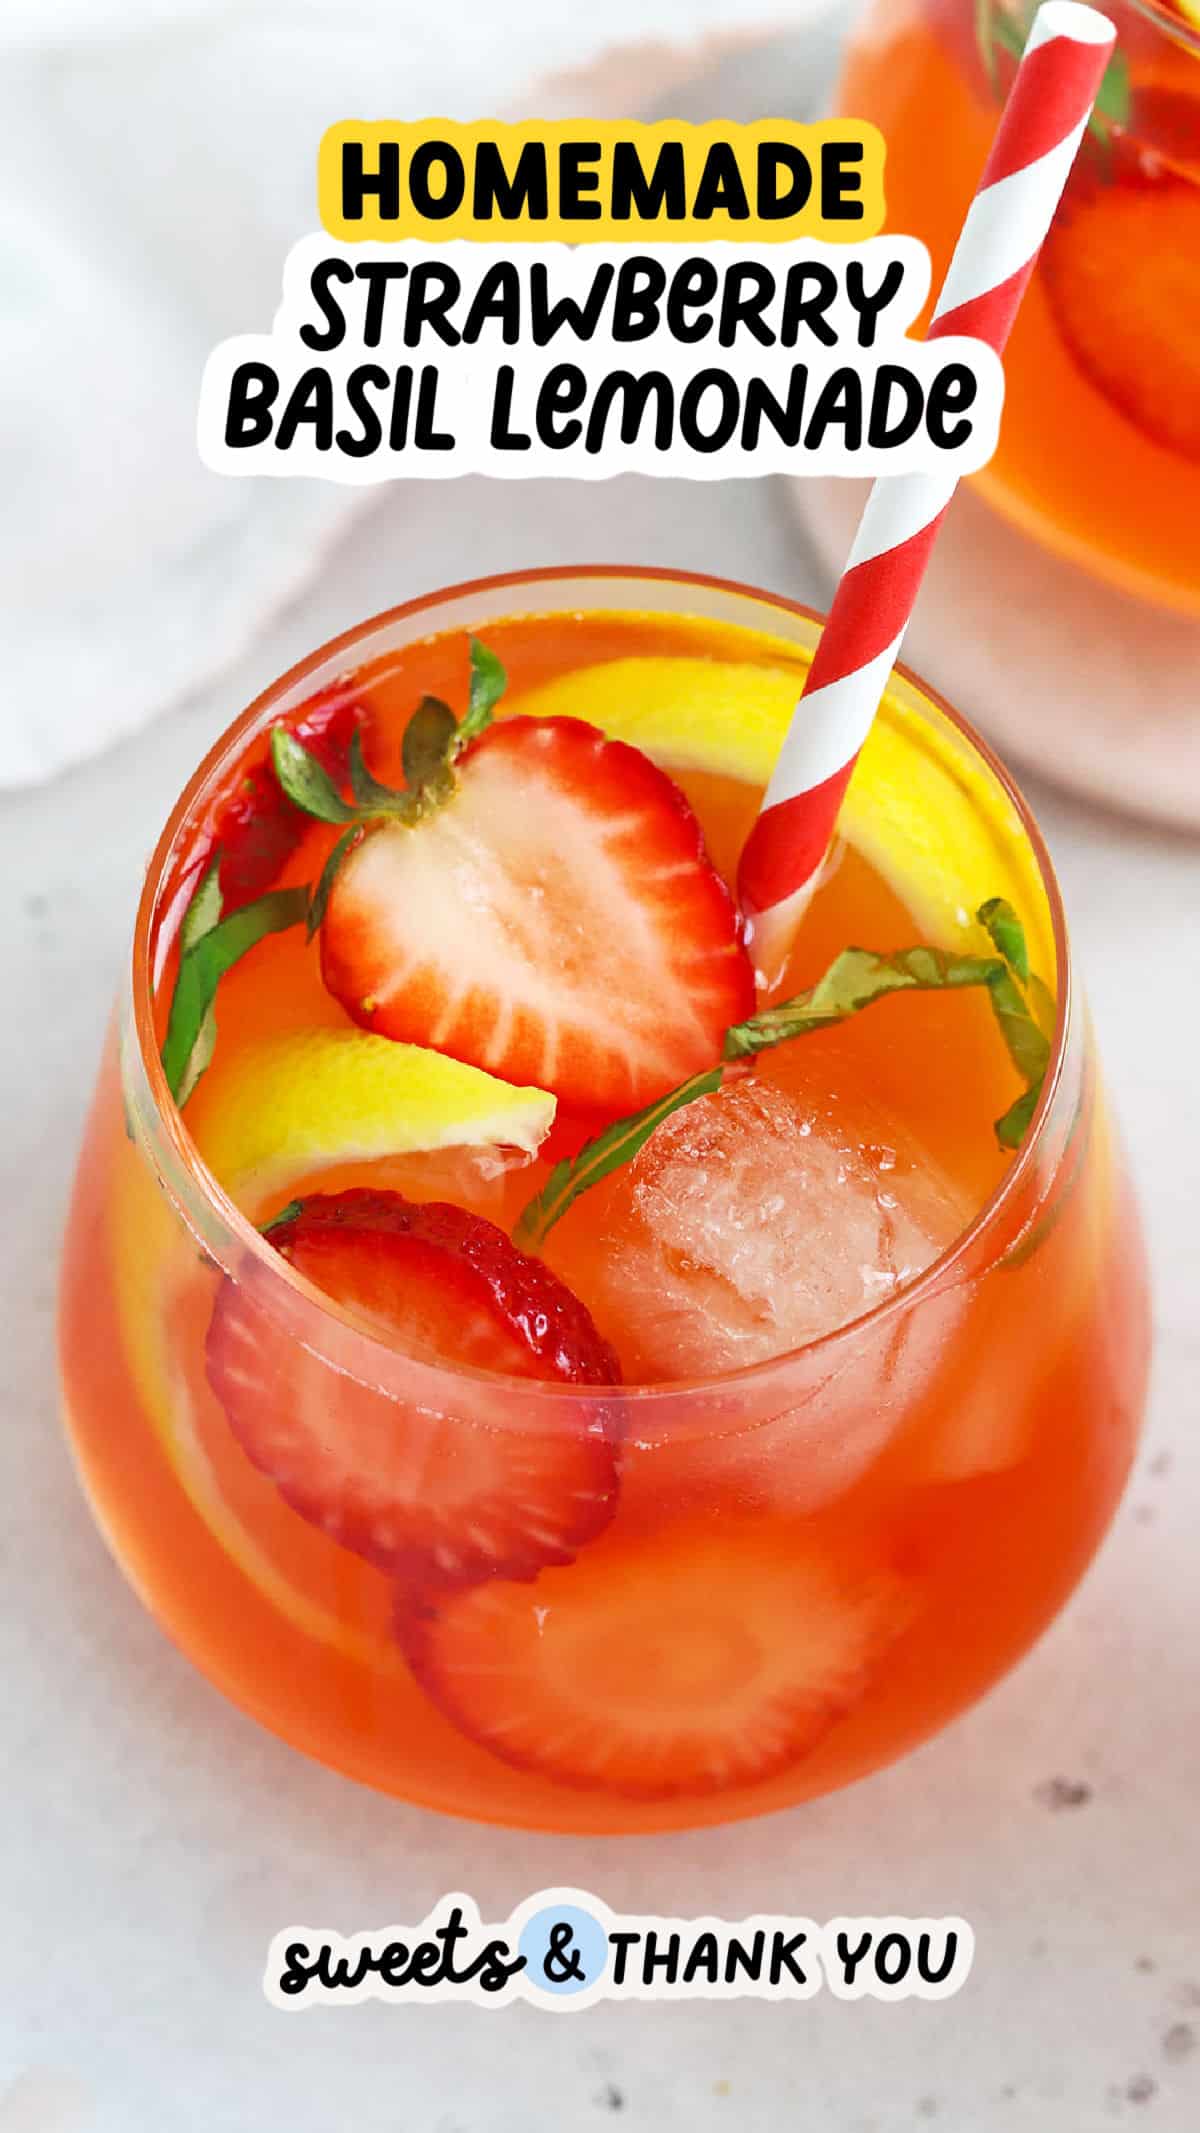 The perfect summer drink = Strawberry Basil Lemonade! This homemade strawberry lemonade recipe tastes incredible thanks to a few secret ingredients. It's better than restaurant lemonade--the perfect easy summer drink recipe. 